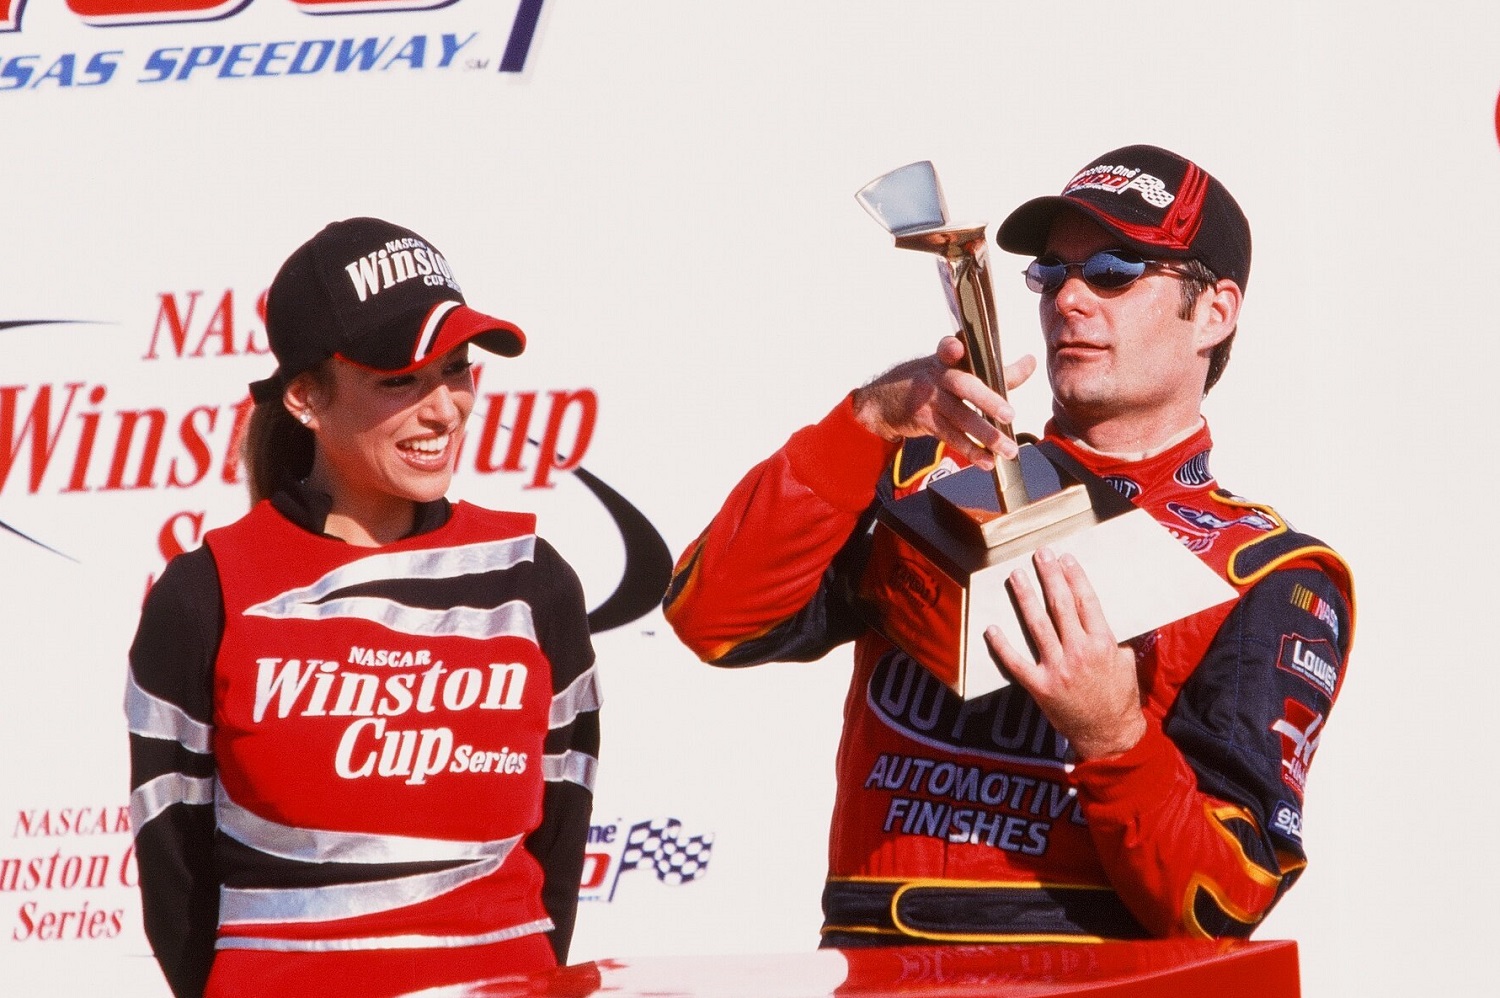 Jeff Gordon Ranks 1 Track’s Trophies Above the Rest of His NASCAR Race Hardware, and It’s Not Daytona